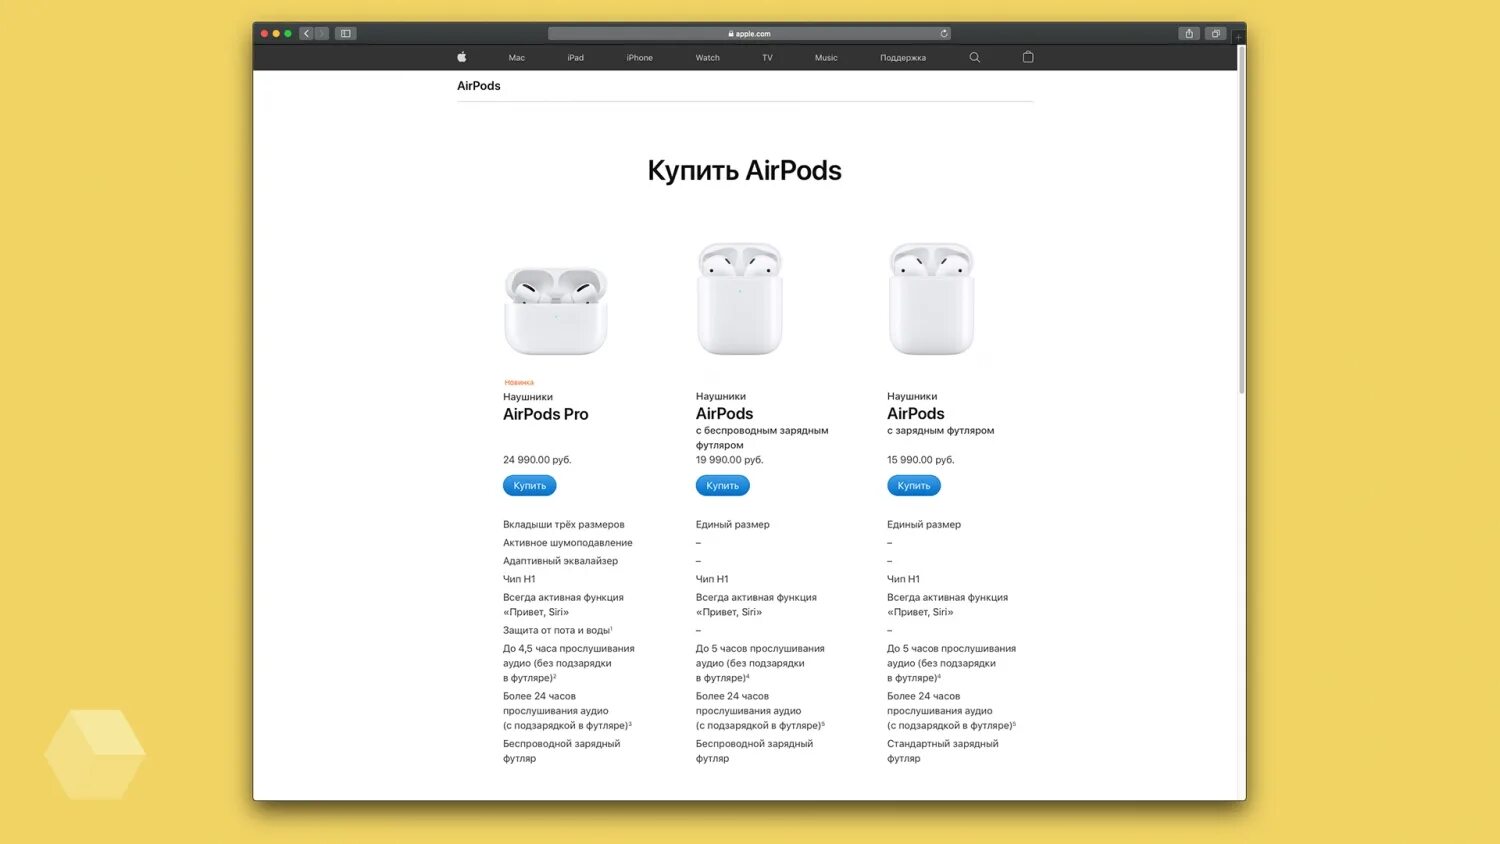 AIRPODS 2 Pro МТС. AIRPODS Pro Размеры. AIRPODS МТС. AIRPODS Pro диаметр динамика. Функции airpods 2